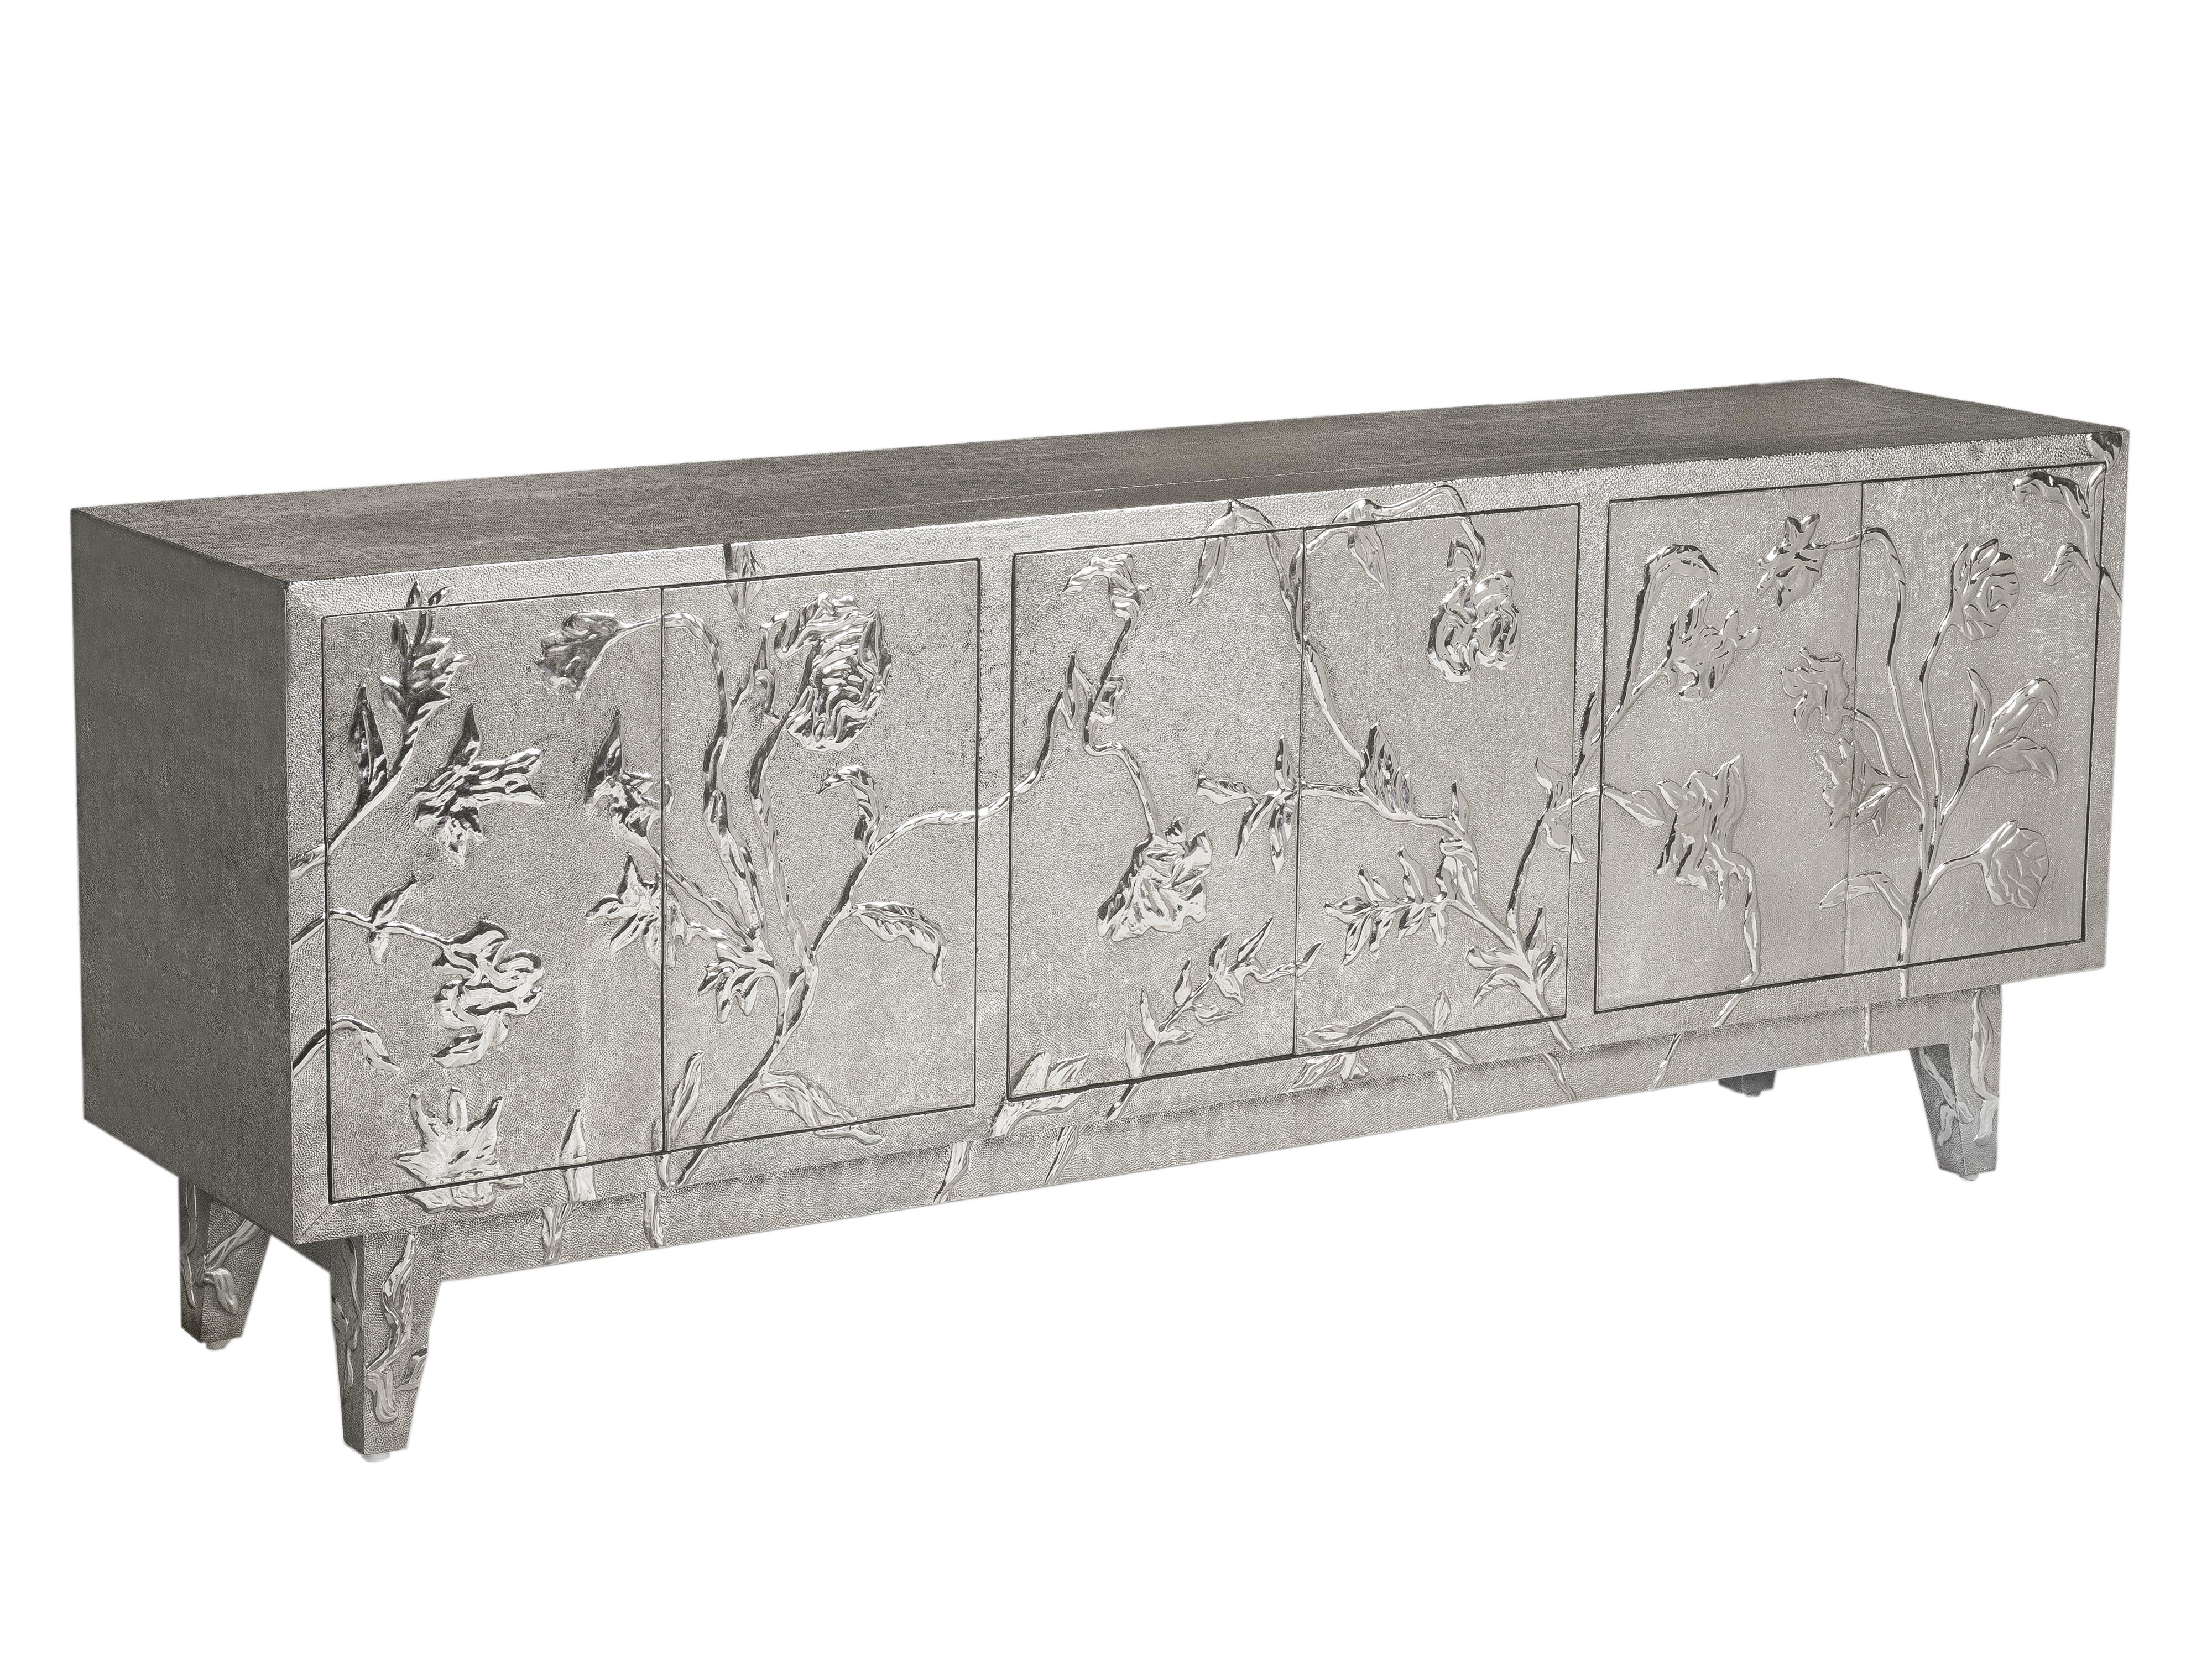 Hand-Carved Art Deco Drawers in Floral Design by Stephanie Odegard For Sale